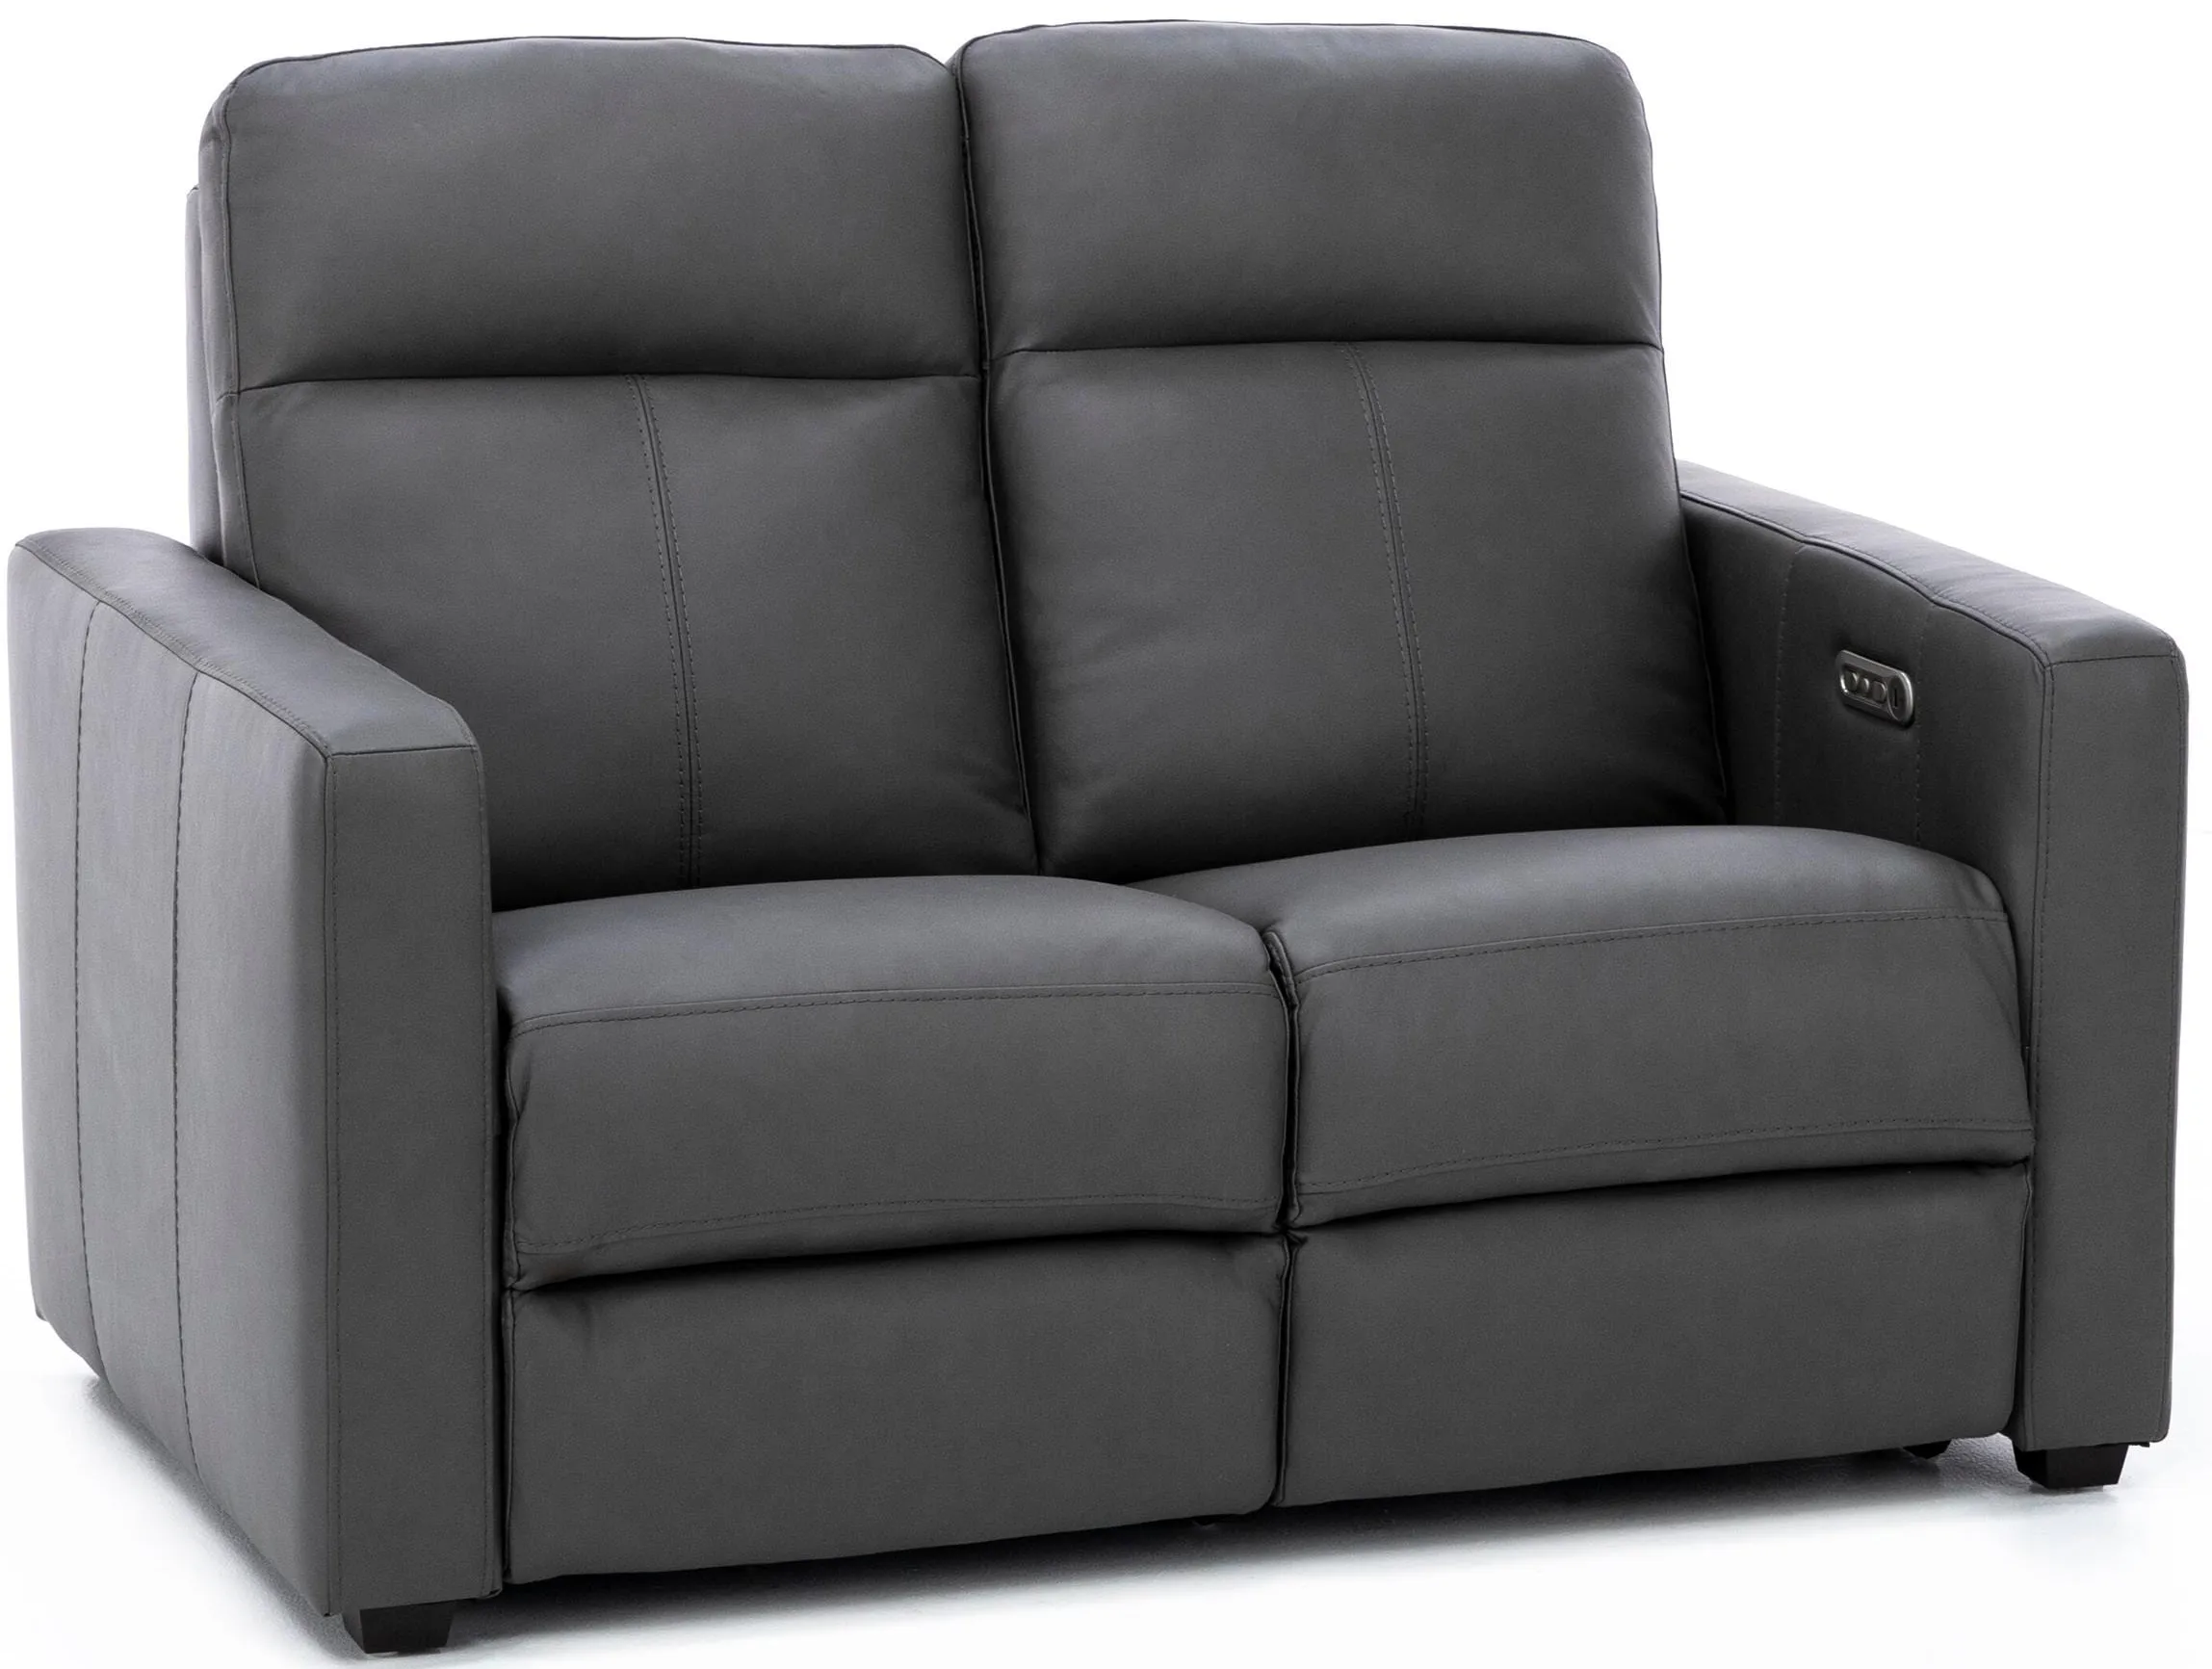 Times Square Leather Power Headrest Reclining Loveseat